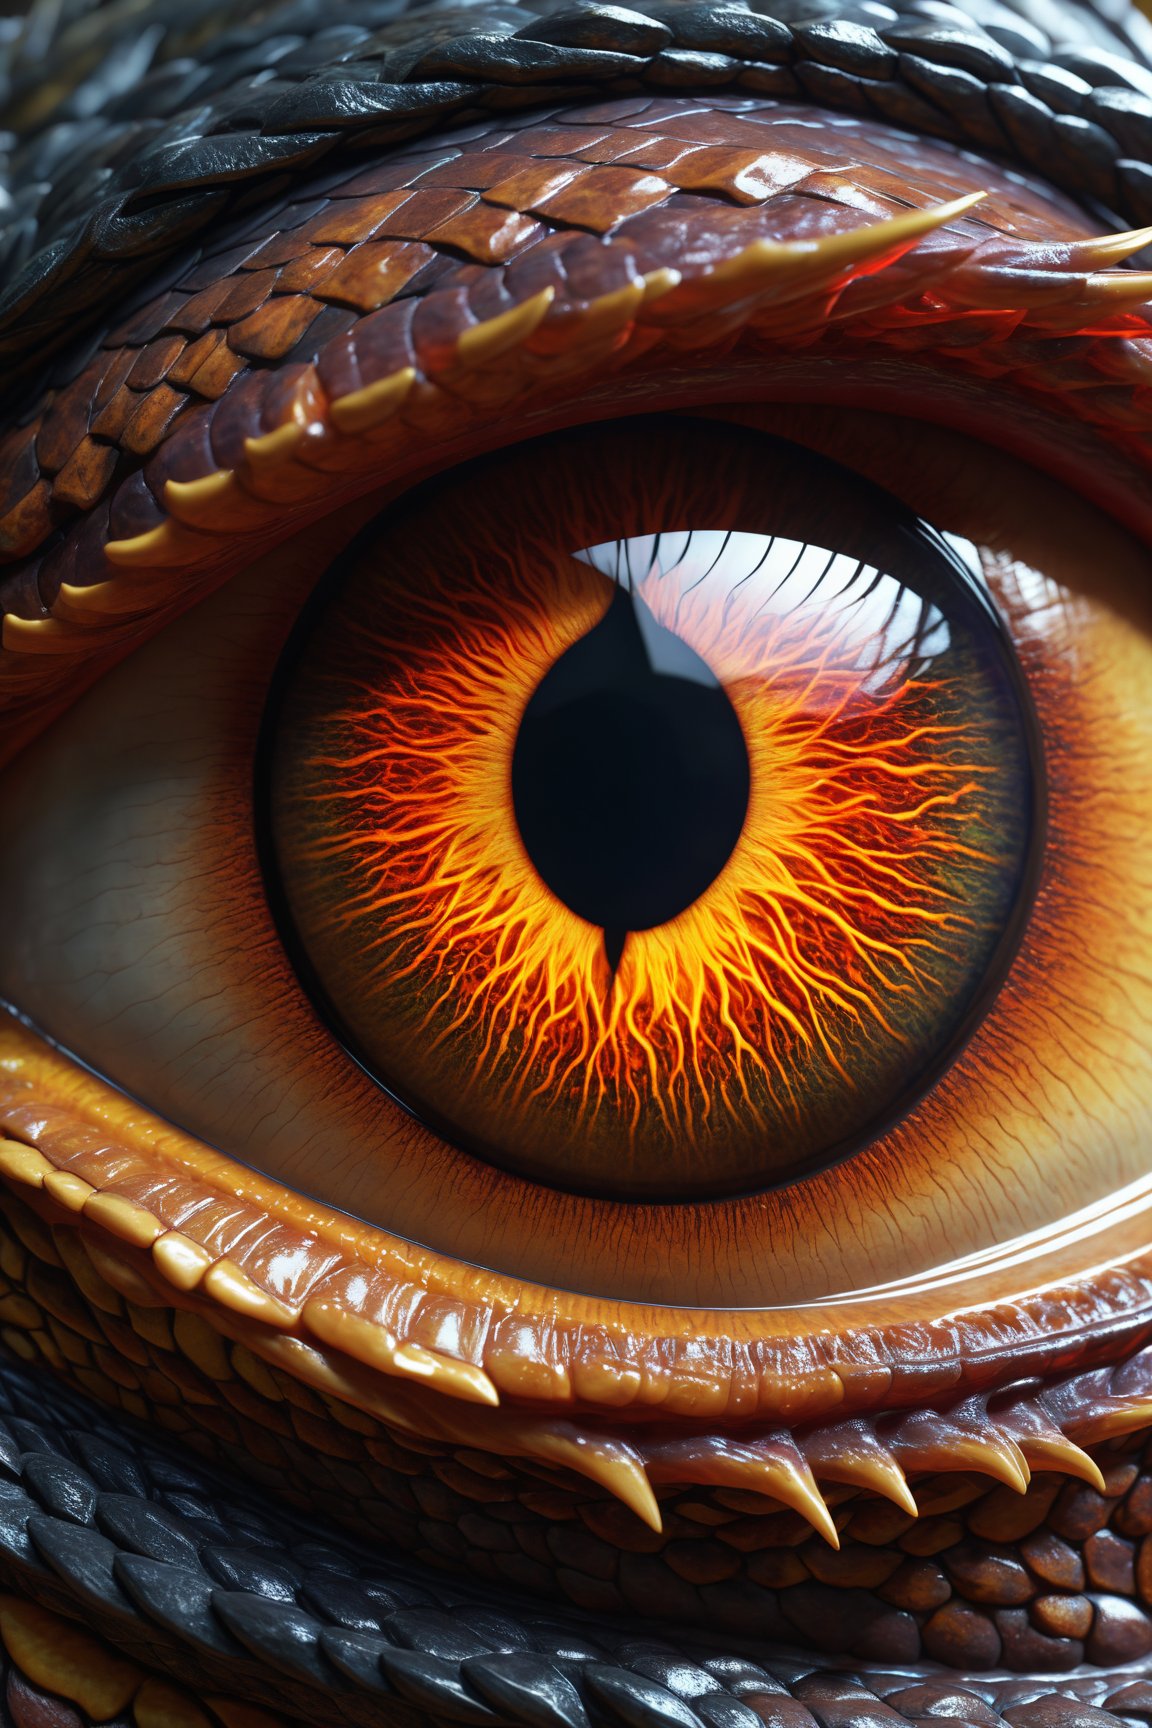 (best quality, 8K, highres, masterpiece), utilizing Octane render for hyper-detailed, sharp focus depiction of a dragon's eye in a macro photography style. This image captures the intricate textures and vibrant colors of the dragon's eye, revealing the depth and complexity within. The scales surrounding the eye glisten with a realism that seems almost tangible, each scale meticulously crafted to reflect light and shadow with precision. The pupil, a slit against the fiery iris, holds an intensity that suggests ancient wisdom and primal ferocity. The use of Octane render enhances the visual impact, bringing out the luminosity and detailed textures in stunning clarity, creating a mesmerizing image that invites the viewer to gaze into the mythical depth of a creature from legend, captured as if through the lens of a high-end macro camera, focusing intensely on the beauty and mystery of the dragon's gaze.